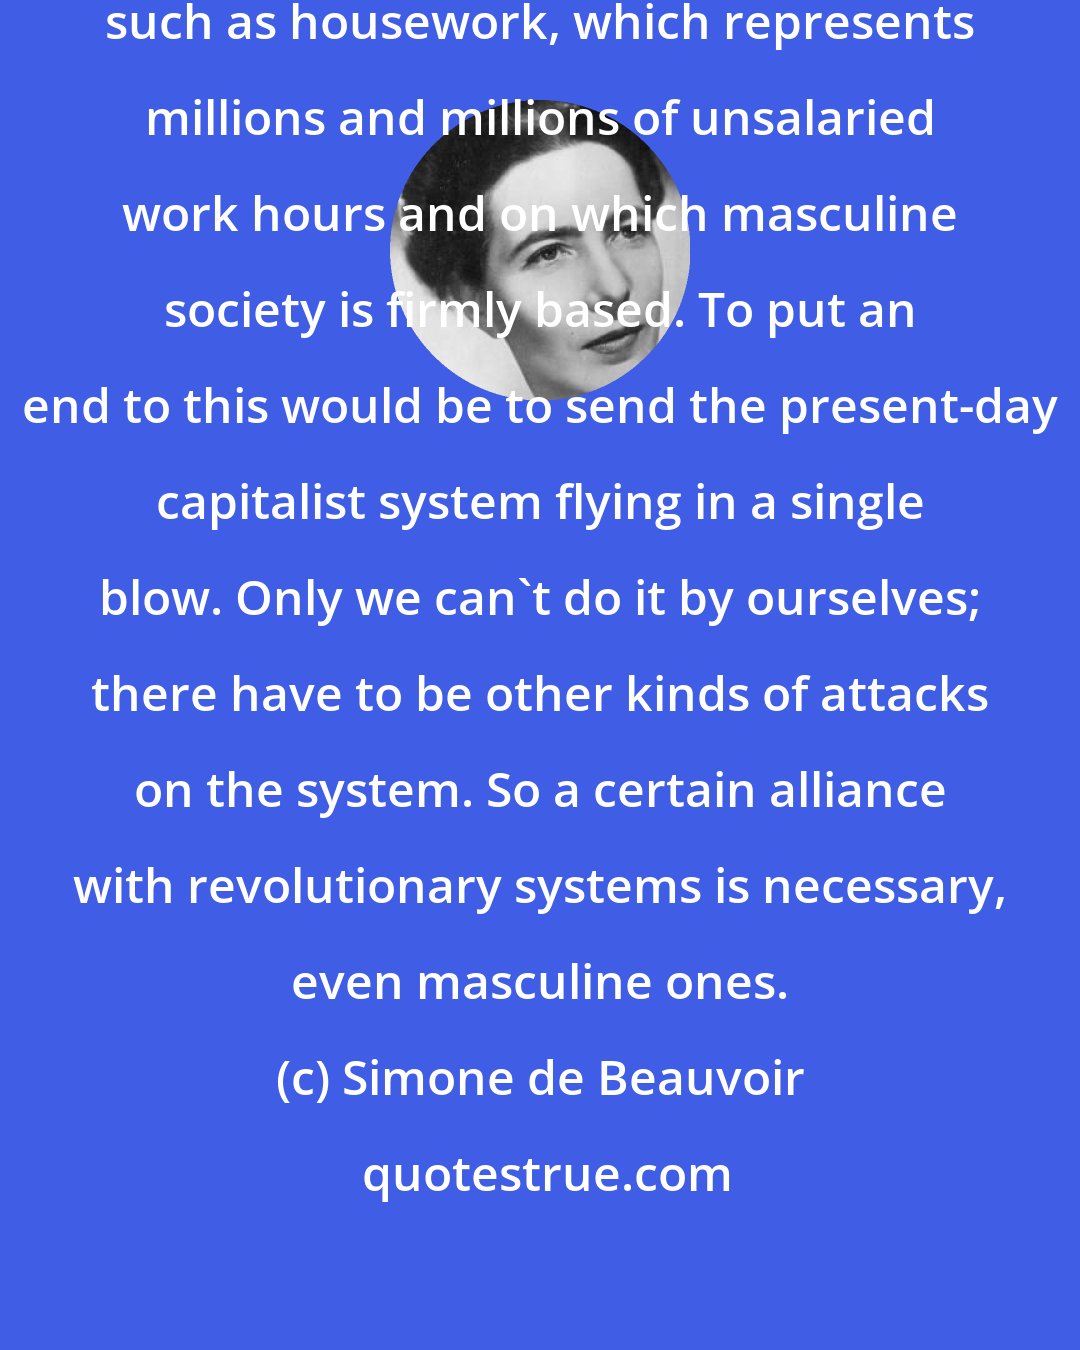 Simone de Beauvoir: There is the problem of unpaid labor, such as housework, which represents millions and millions of unsalaried work hours and on which masculine society is firmly based. To put an end to this would be to send the present-day capitalist system flying in a single blow. Only we can't do it by ourselves; there have to be other kinds of attacks on the system. So a certain alliance with revolutionary systems is necessary, even masculine ones.